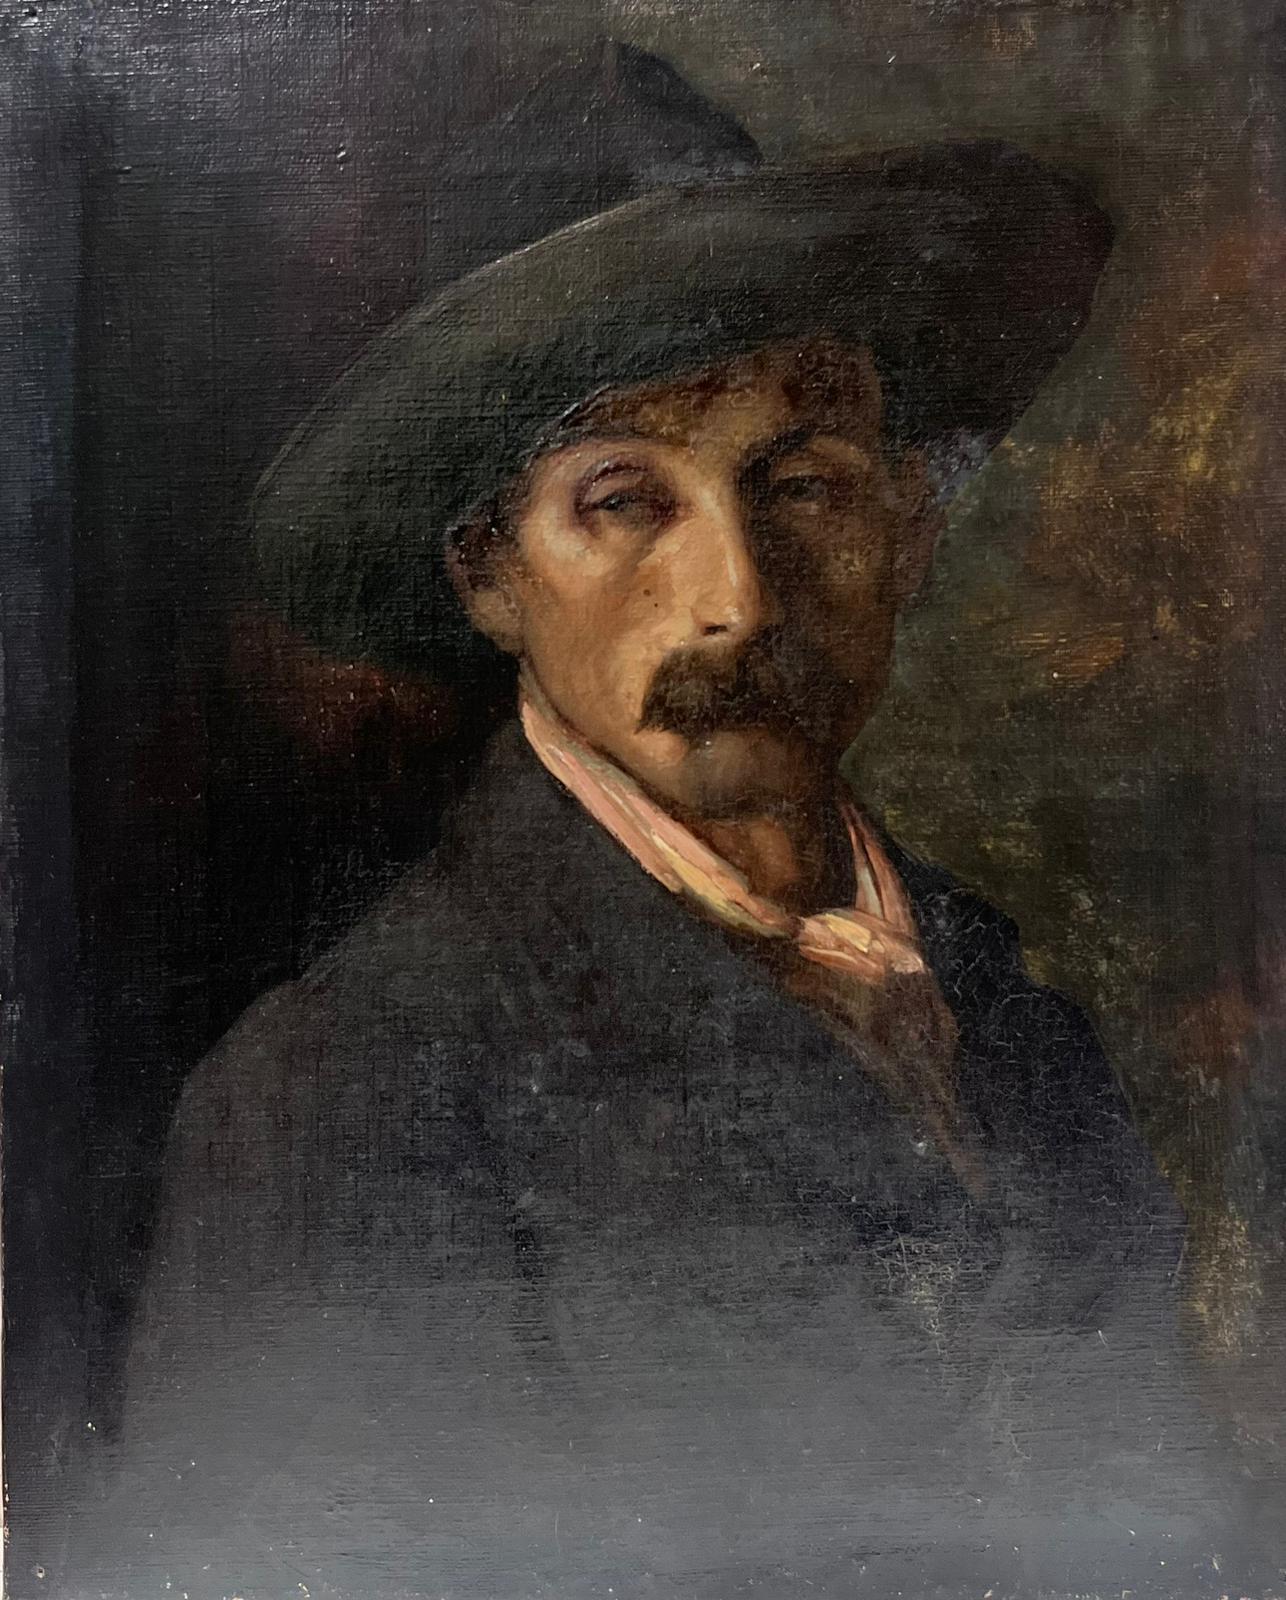 Portrait of a Man in a Hat
French/ German School, late 19th century
indistinctly inscribed verso, dated 1888
oil on canvas, unframed
canvas: 14 x 11.5 inches
provenance: private collection
condition: very good and sound condition 